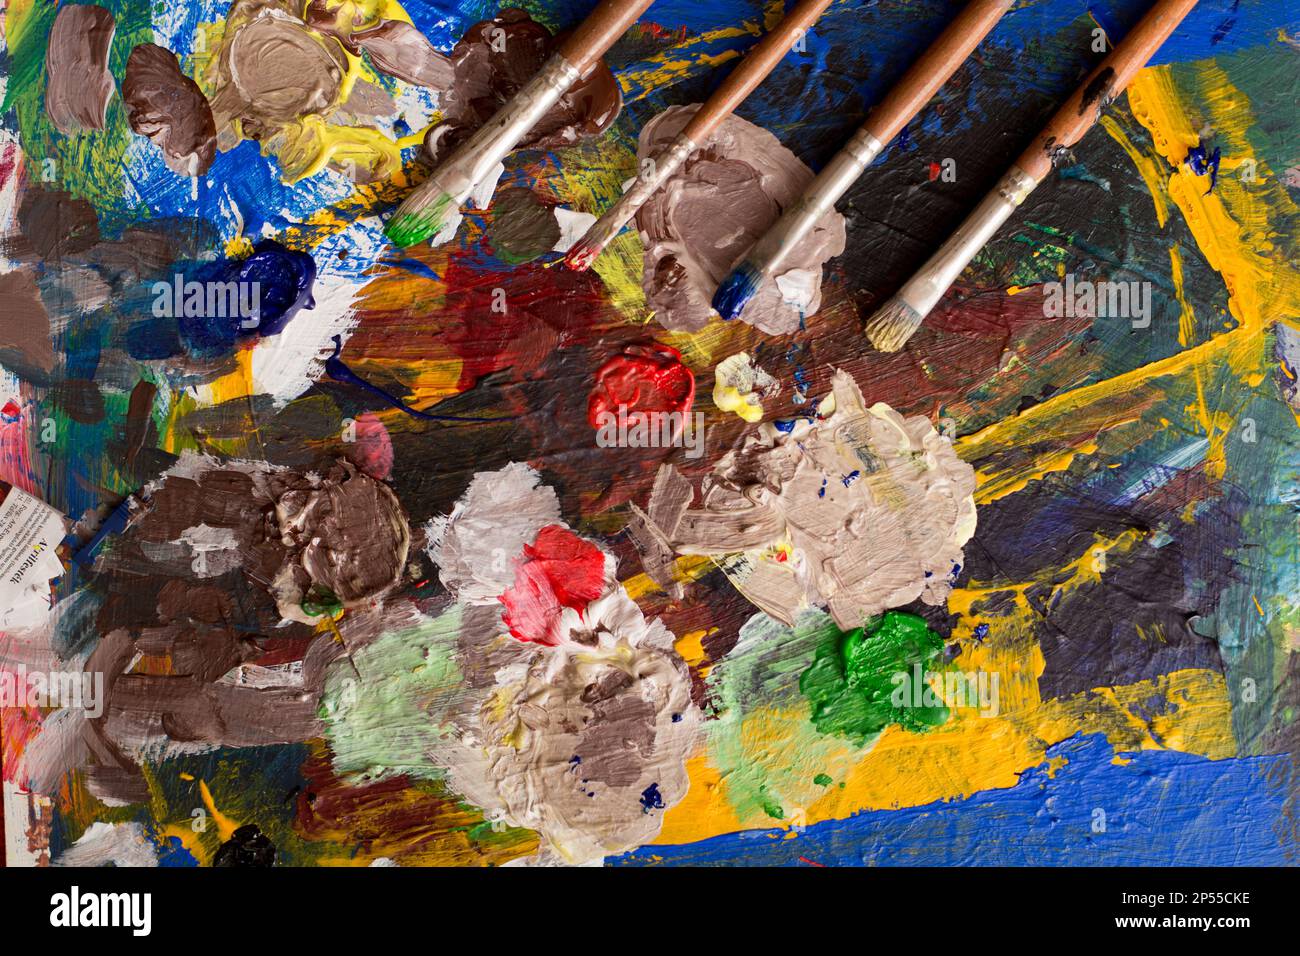 Painting mixing palette art colors and brush Stock Photo - Alamy